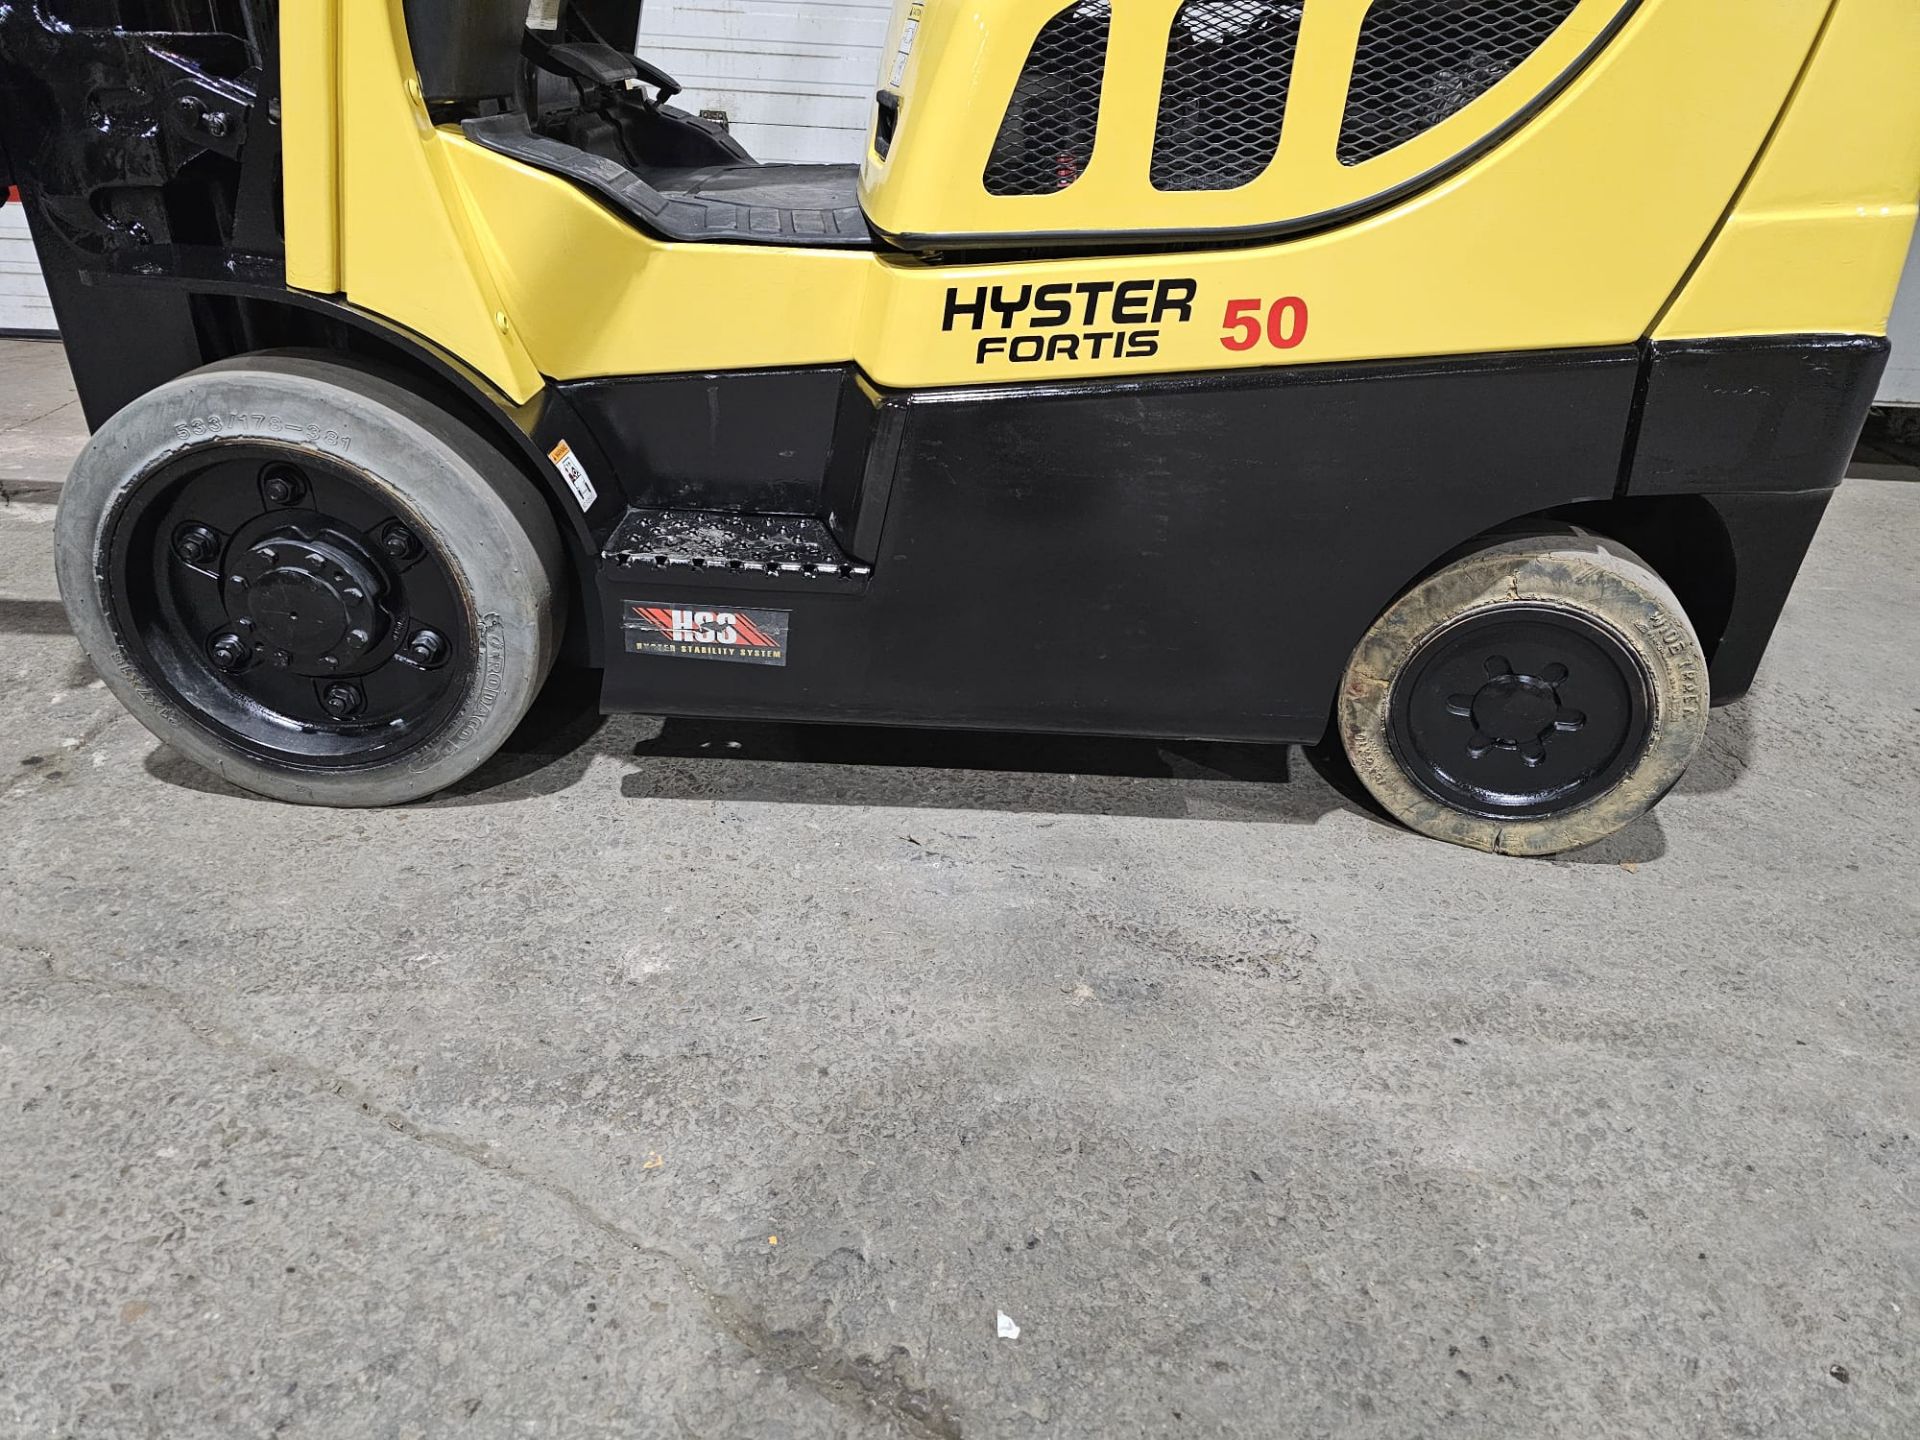 2016 HYSTER 5,000lbs Capacity LPG (Propane) Forklift with sideshift - 4 function control hookup & - Image 5 of 8